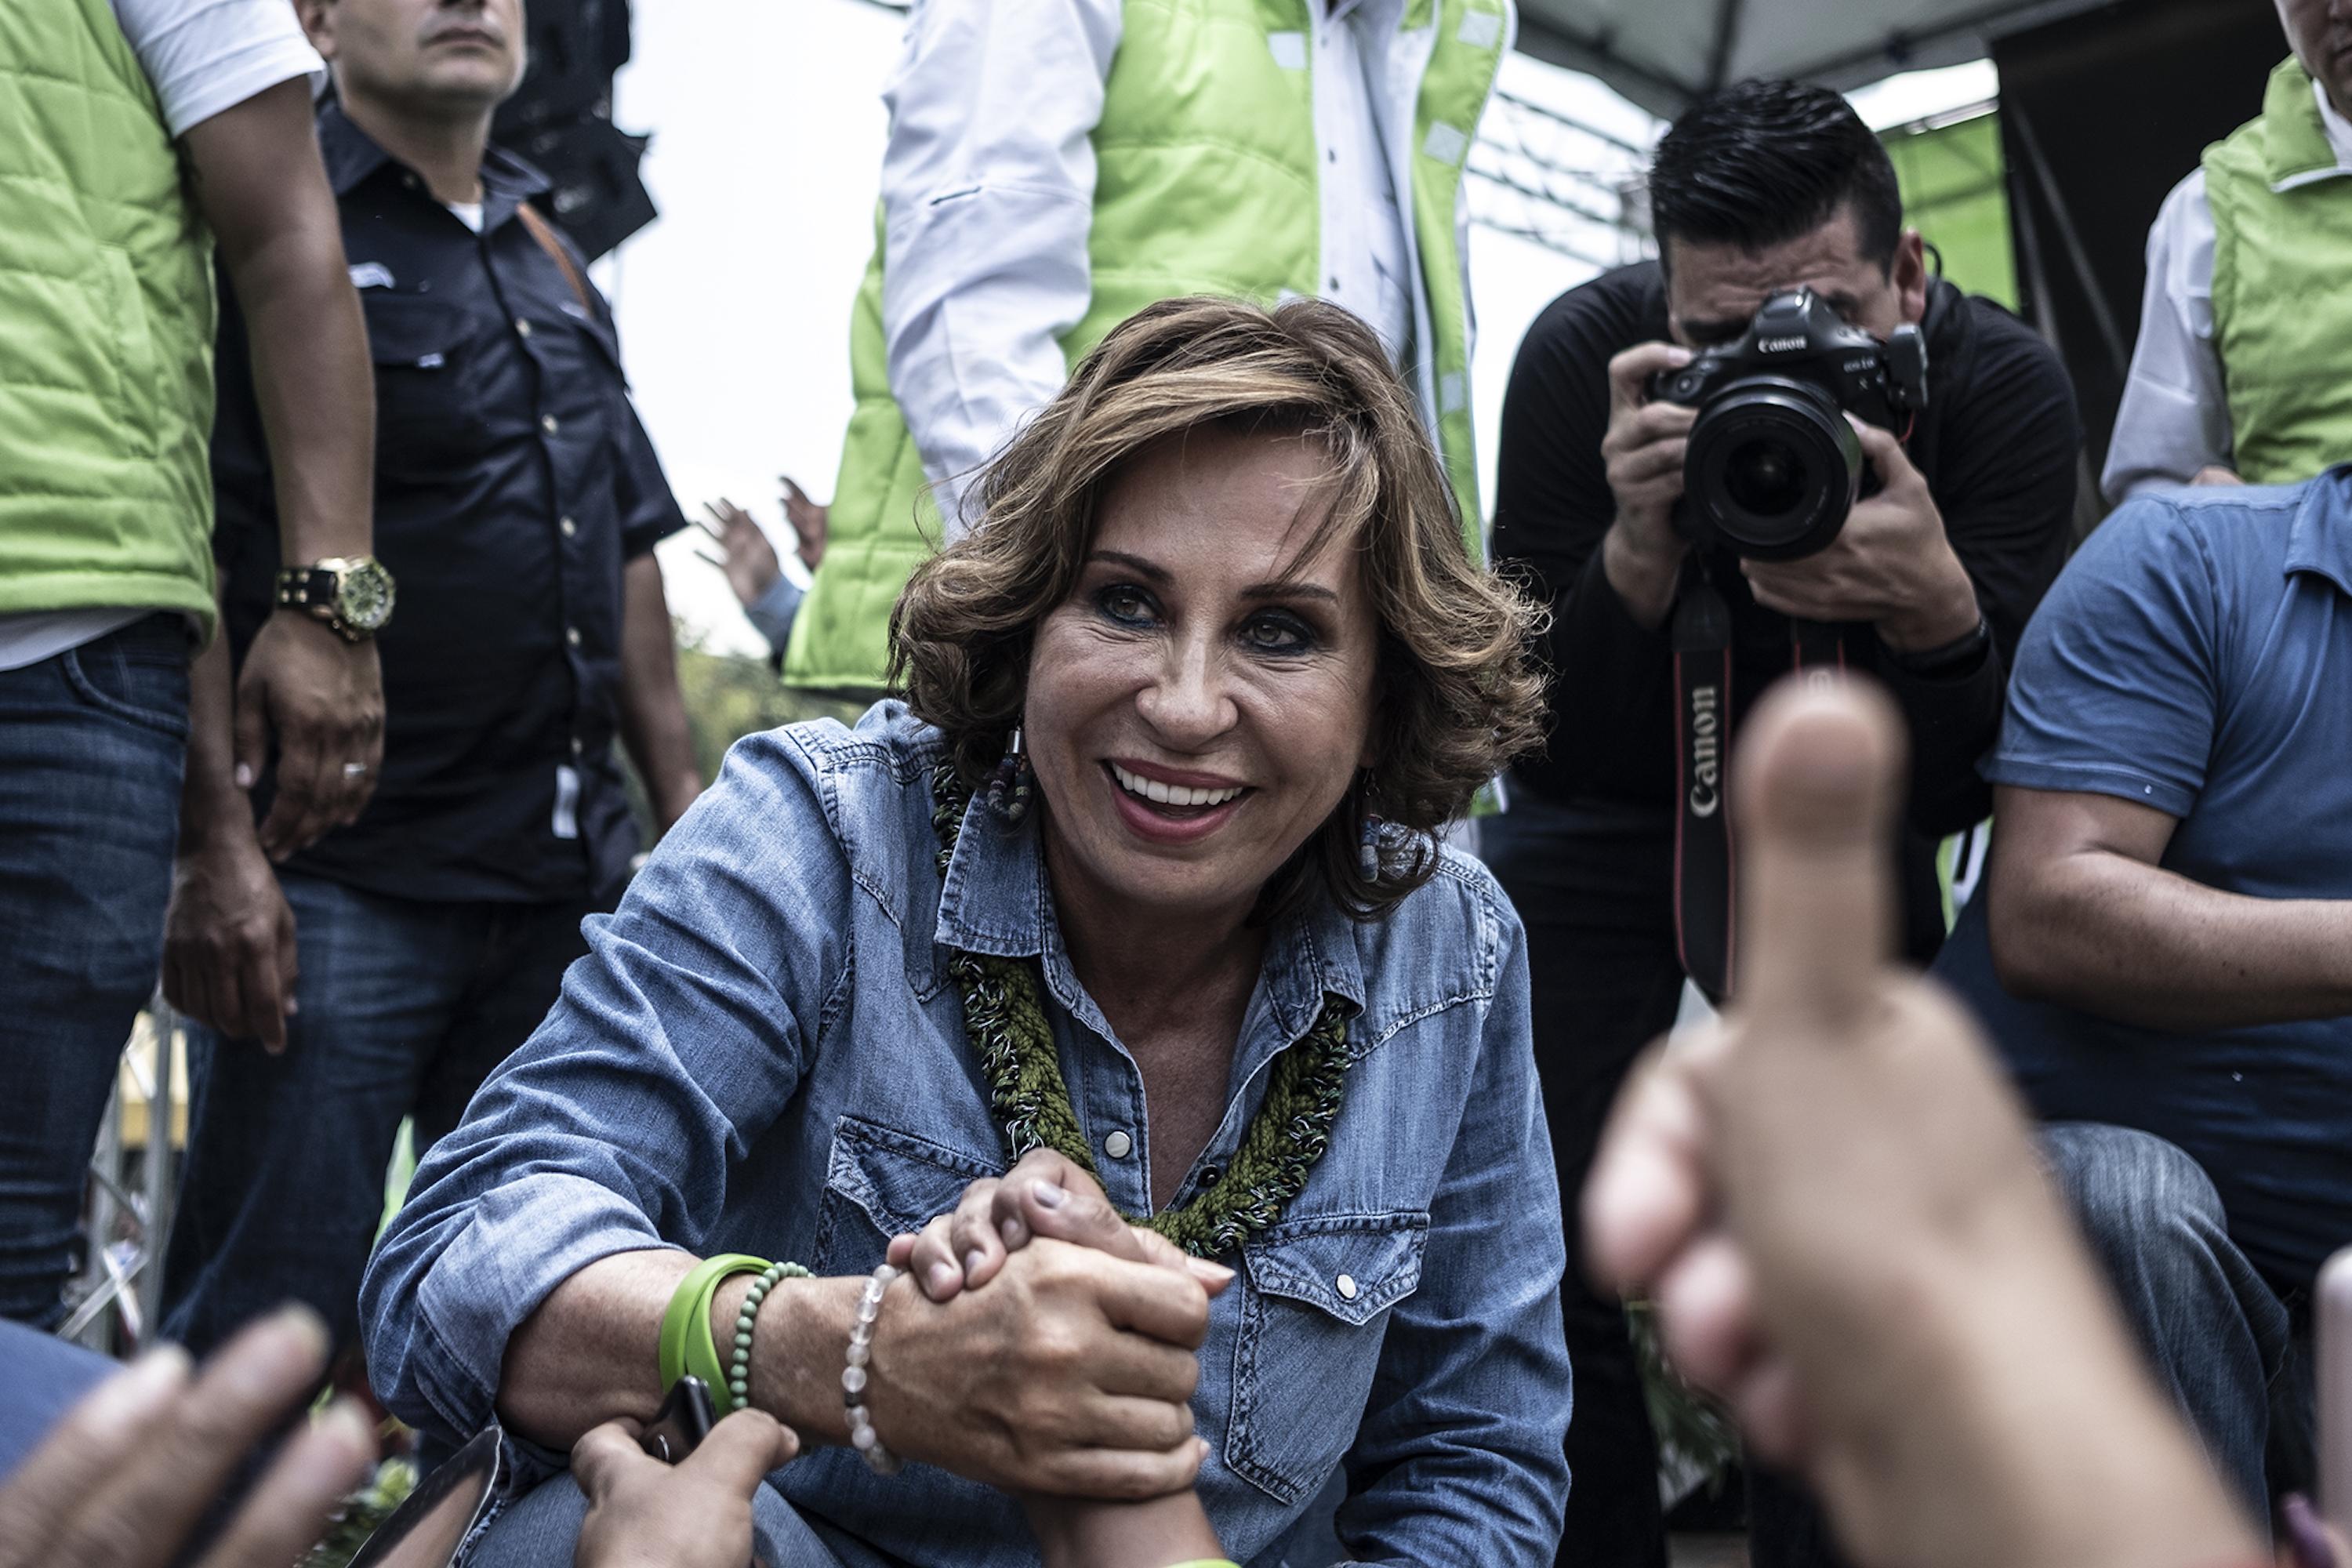 Sandra Torres at the close of her 2019 presidential campaign with the UNE party in Villa Nueva, a city neighboring the capital. Photo Carlos Barrera